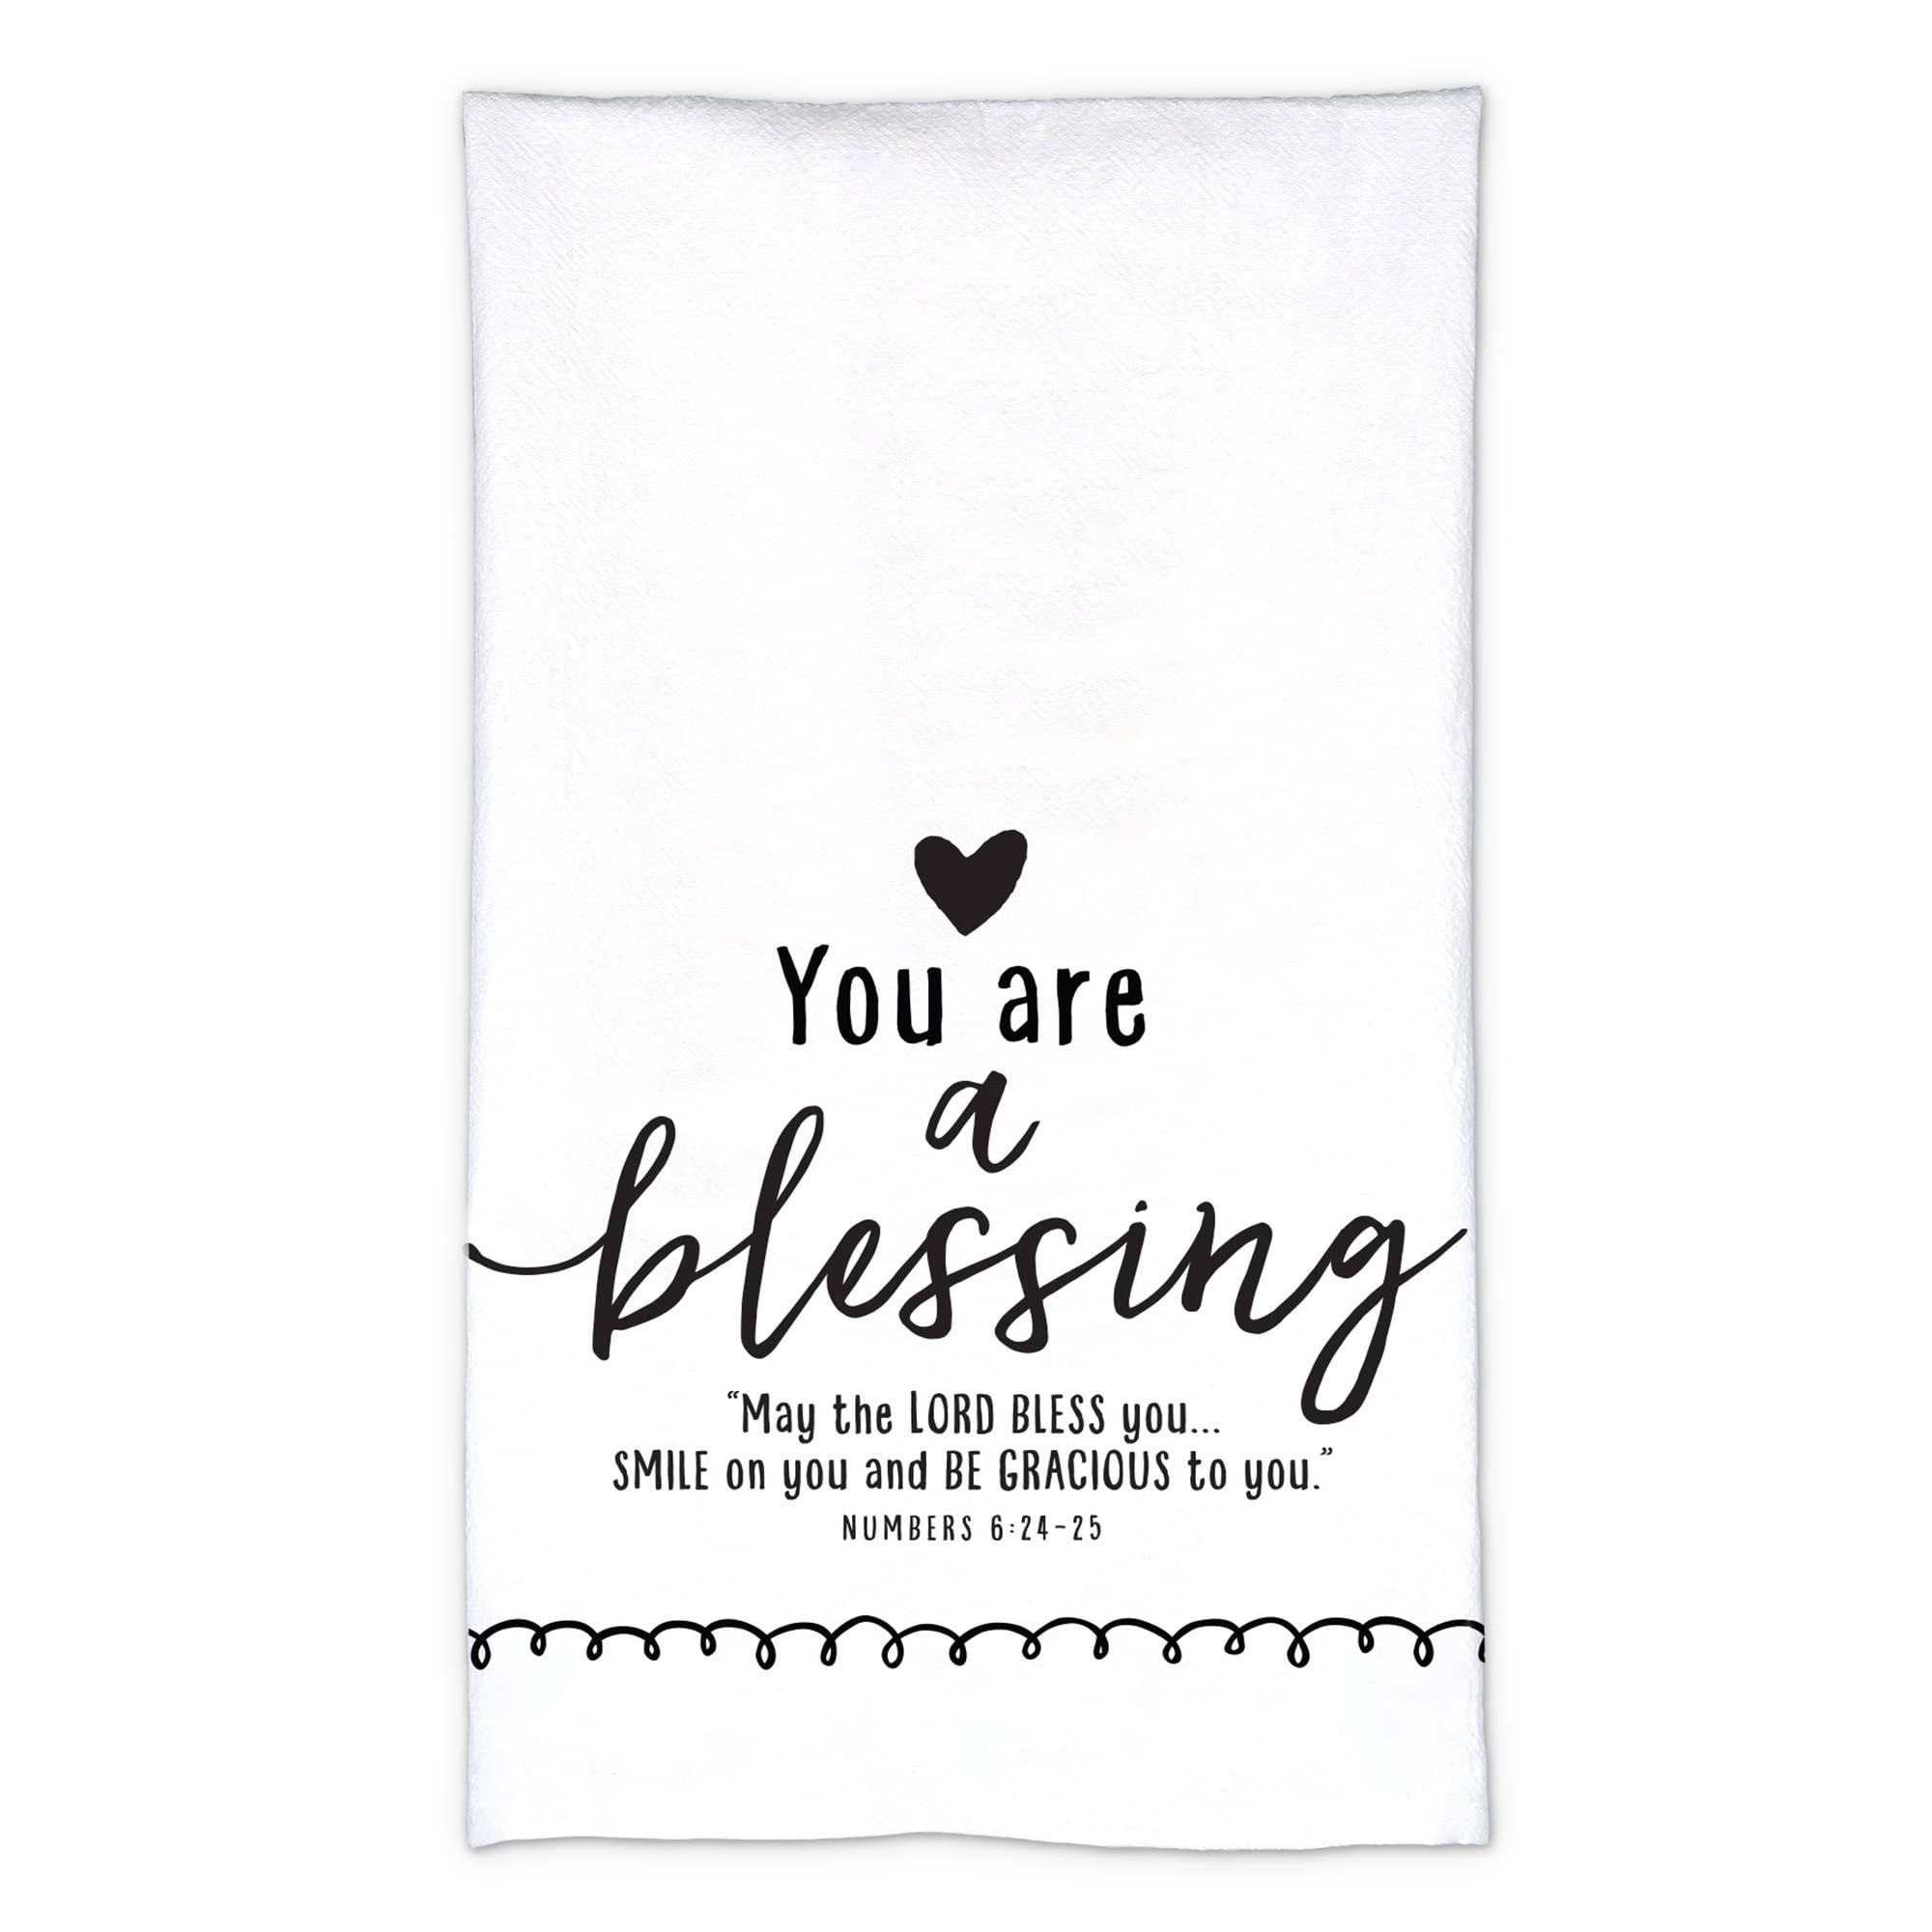 Dicksons White 'You Are a Blessing' Tea Towel One-Size